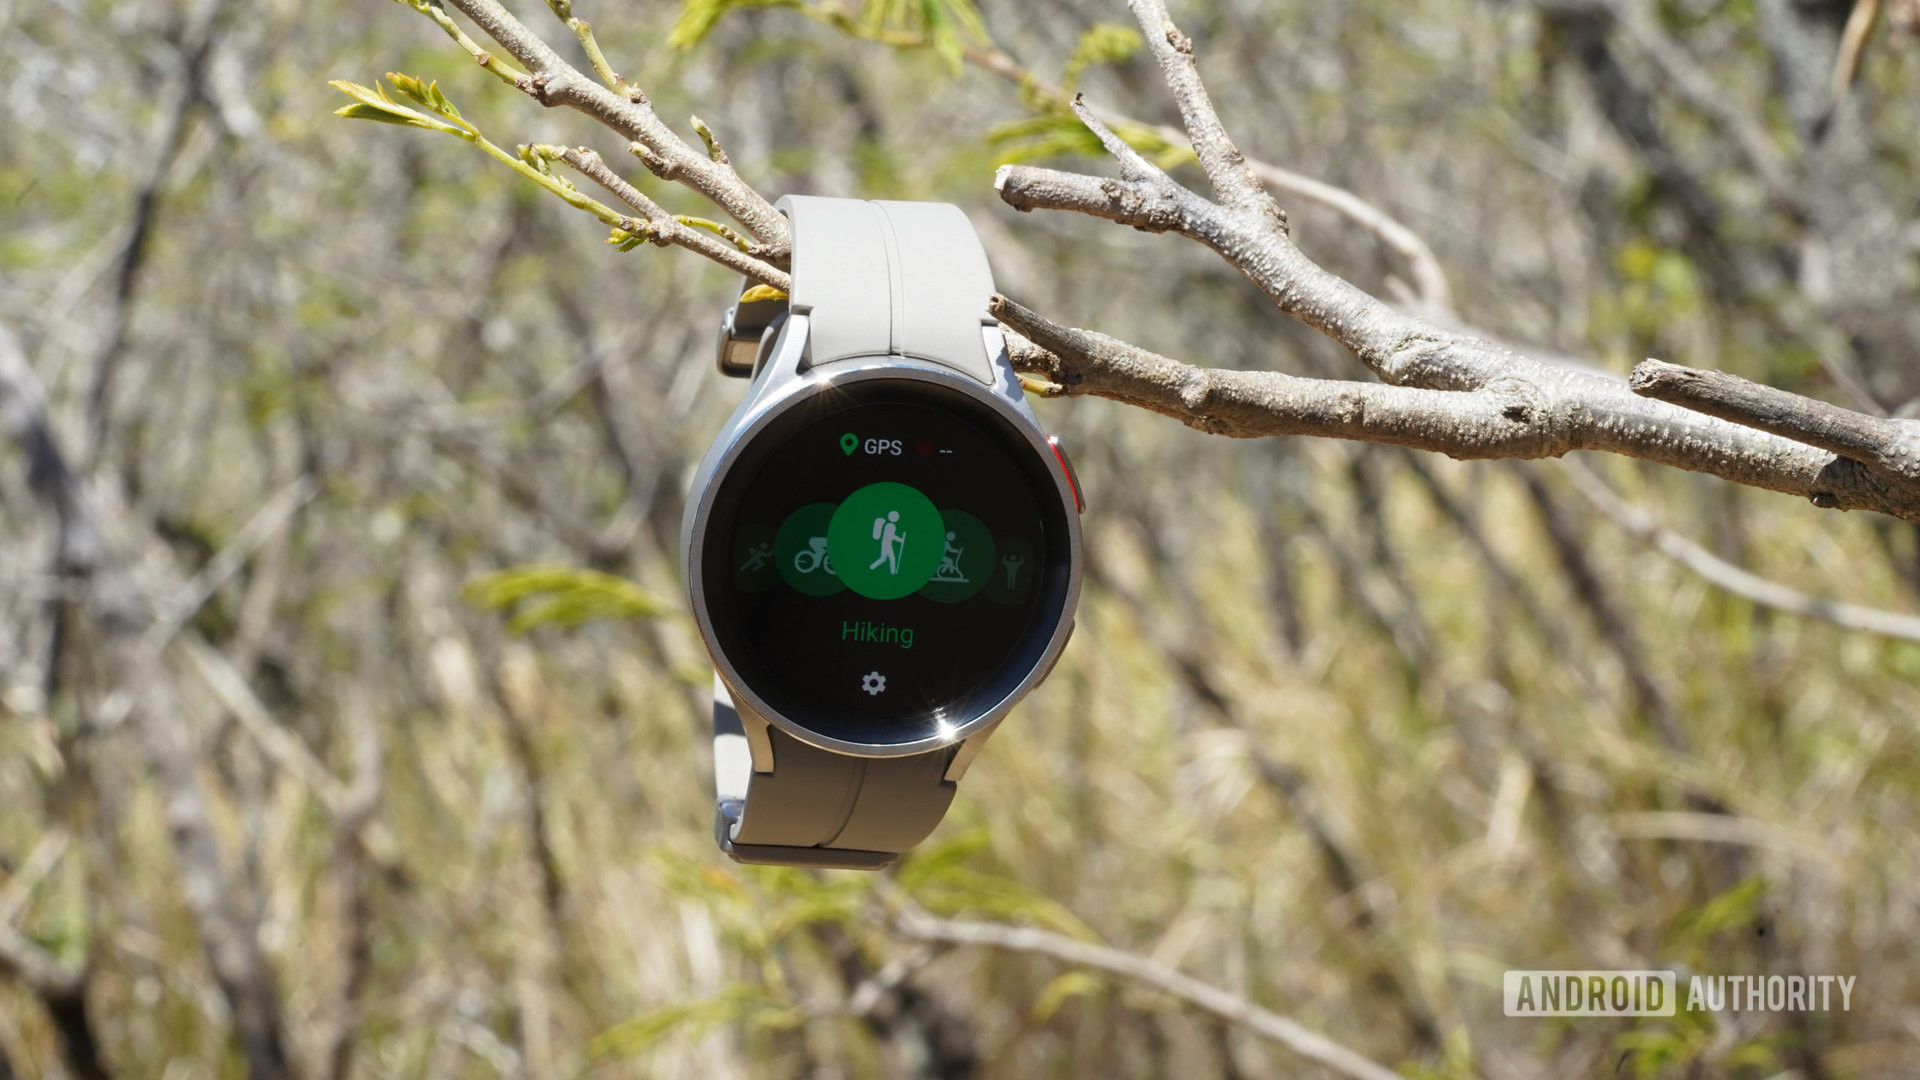 A Samsung Galaxy Watch 5 Pro hangs from a branch, displaying the device's sport mode menu.